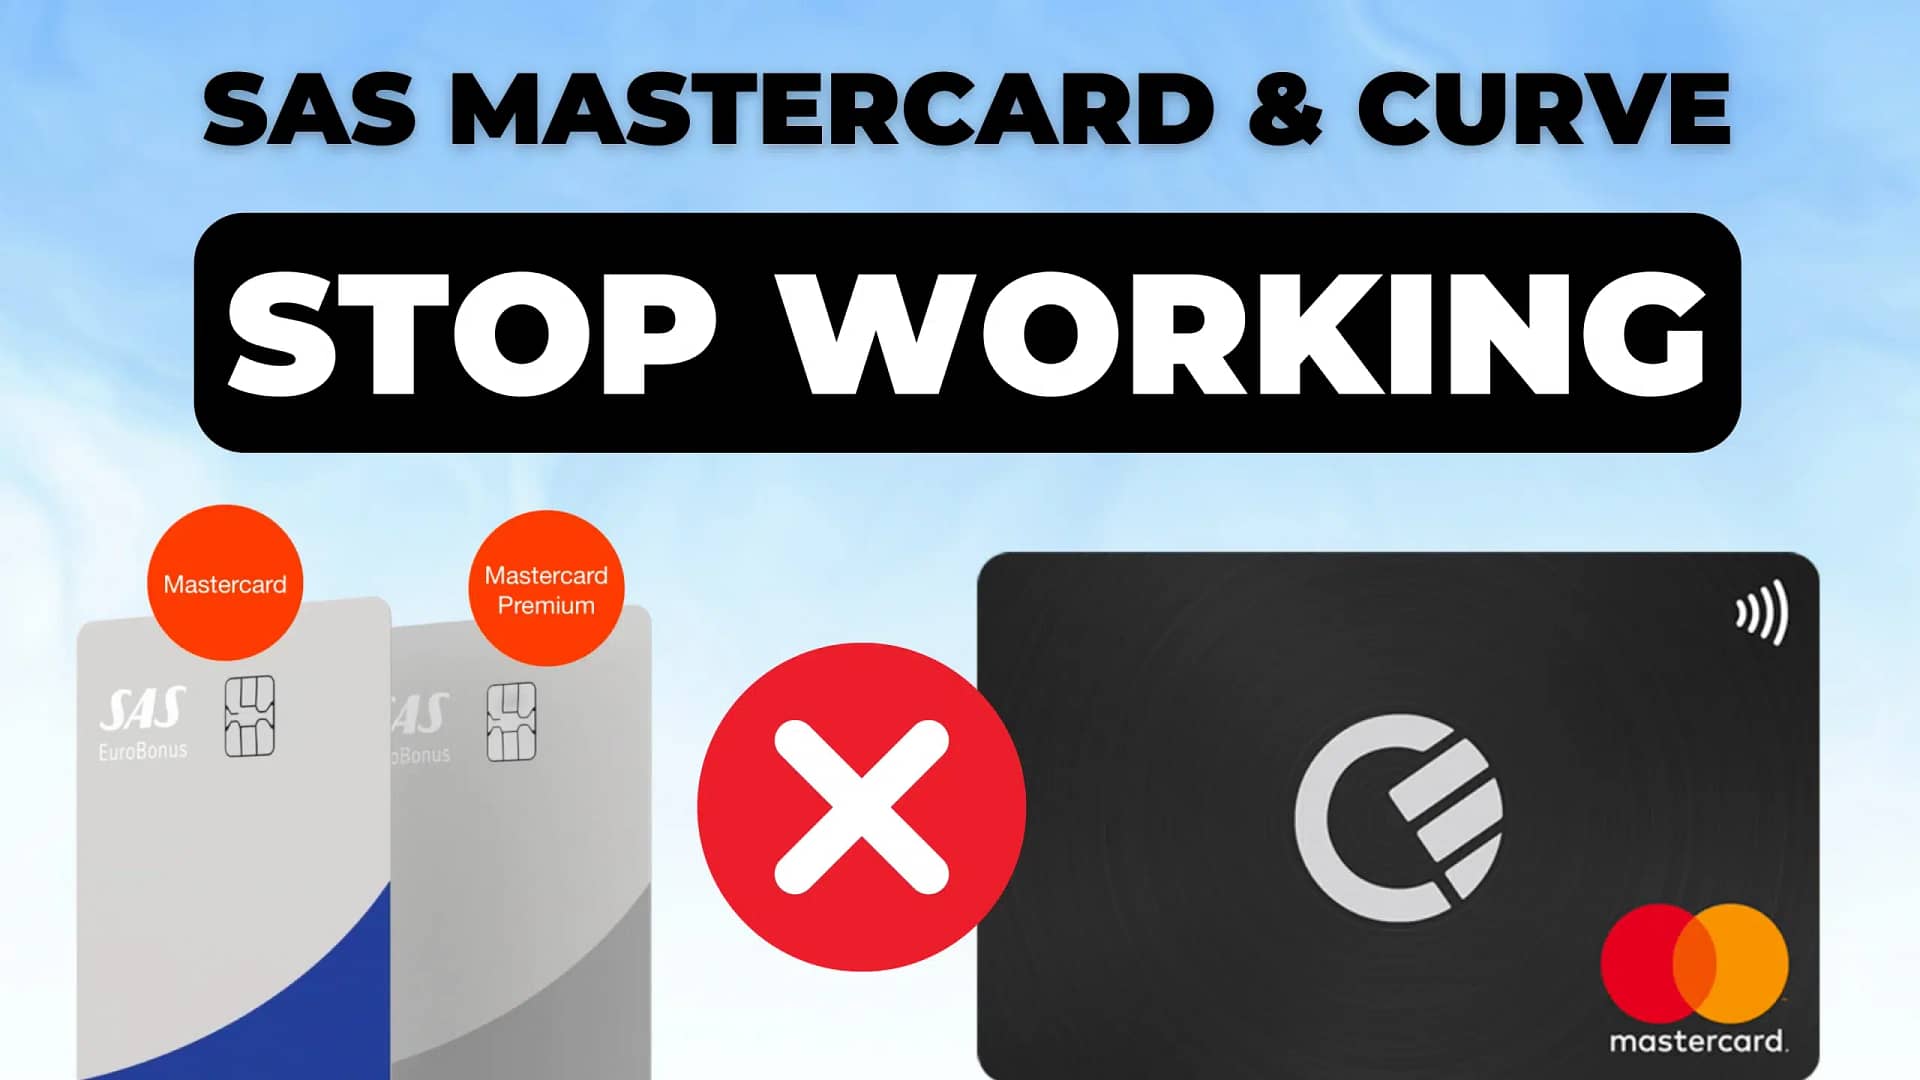 SAS Mastercard stops earning points with Curve